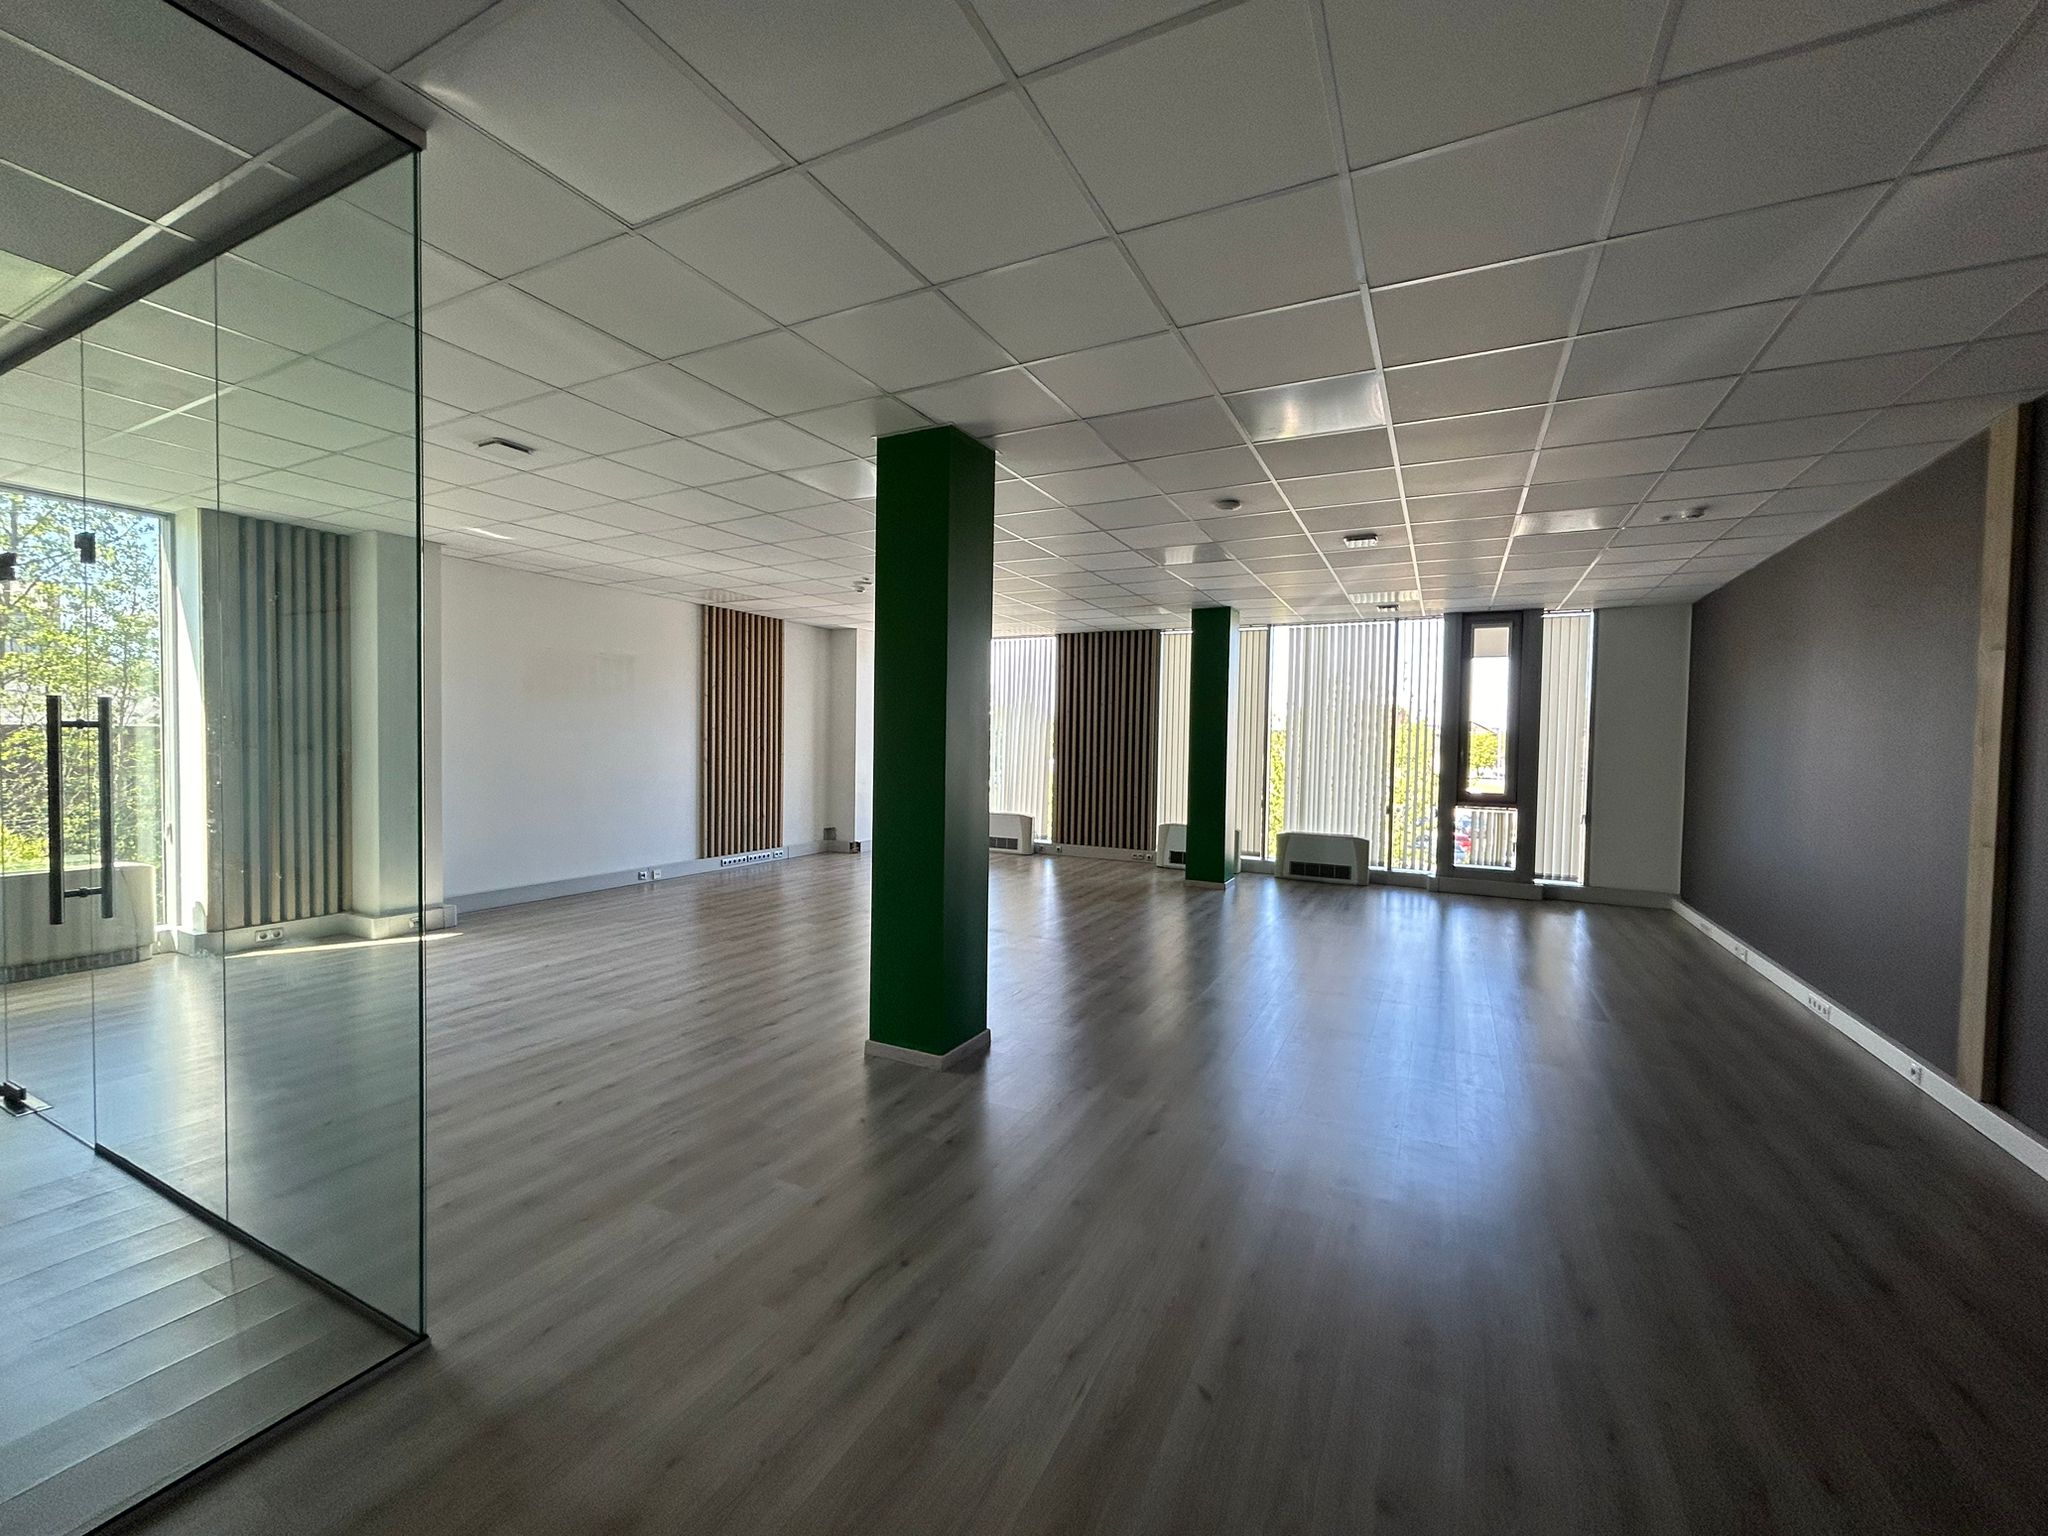 Office for rent, Duntes street - Image 1